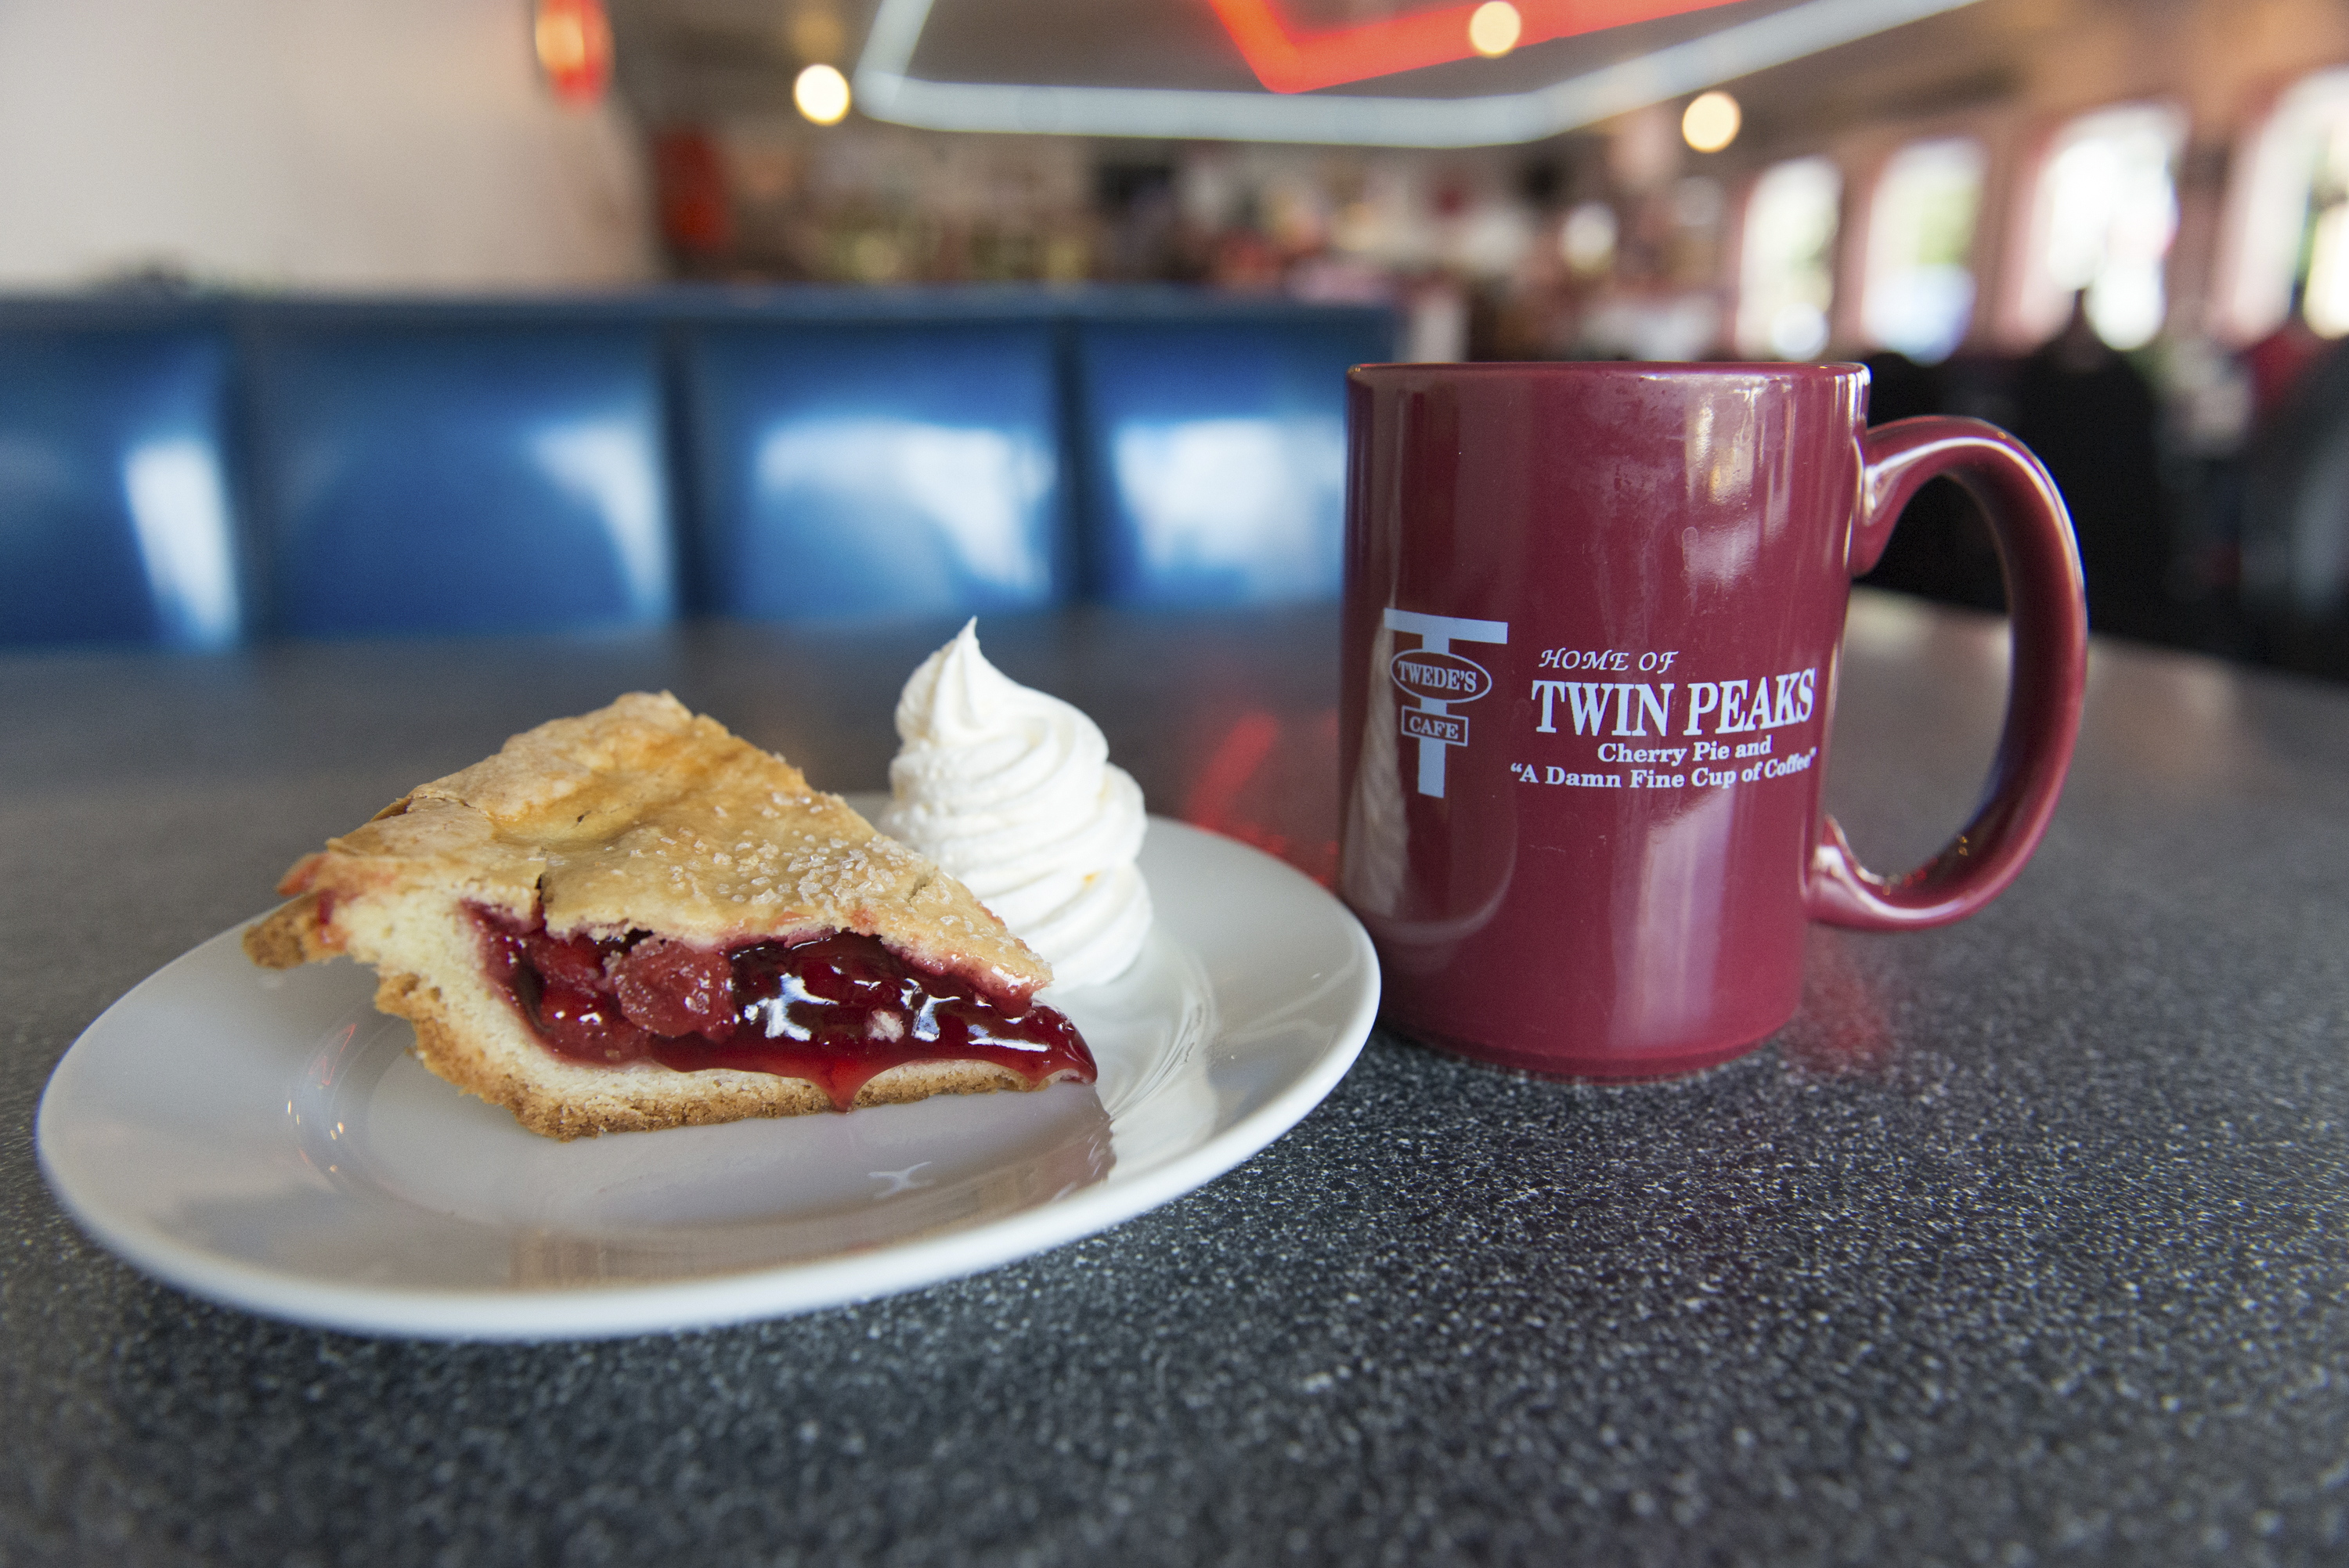 “Diane, if you ever get up this way, that cherry pie is worth a stop.” —Agent Dale Cooper